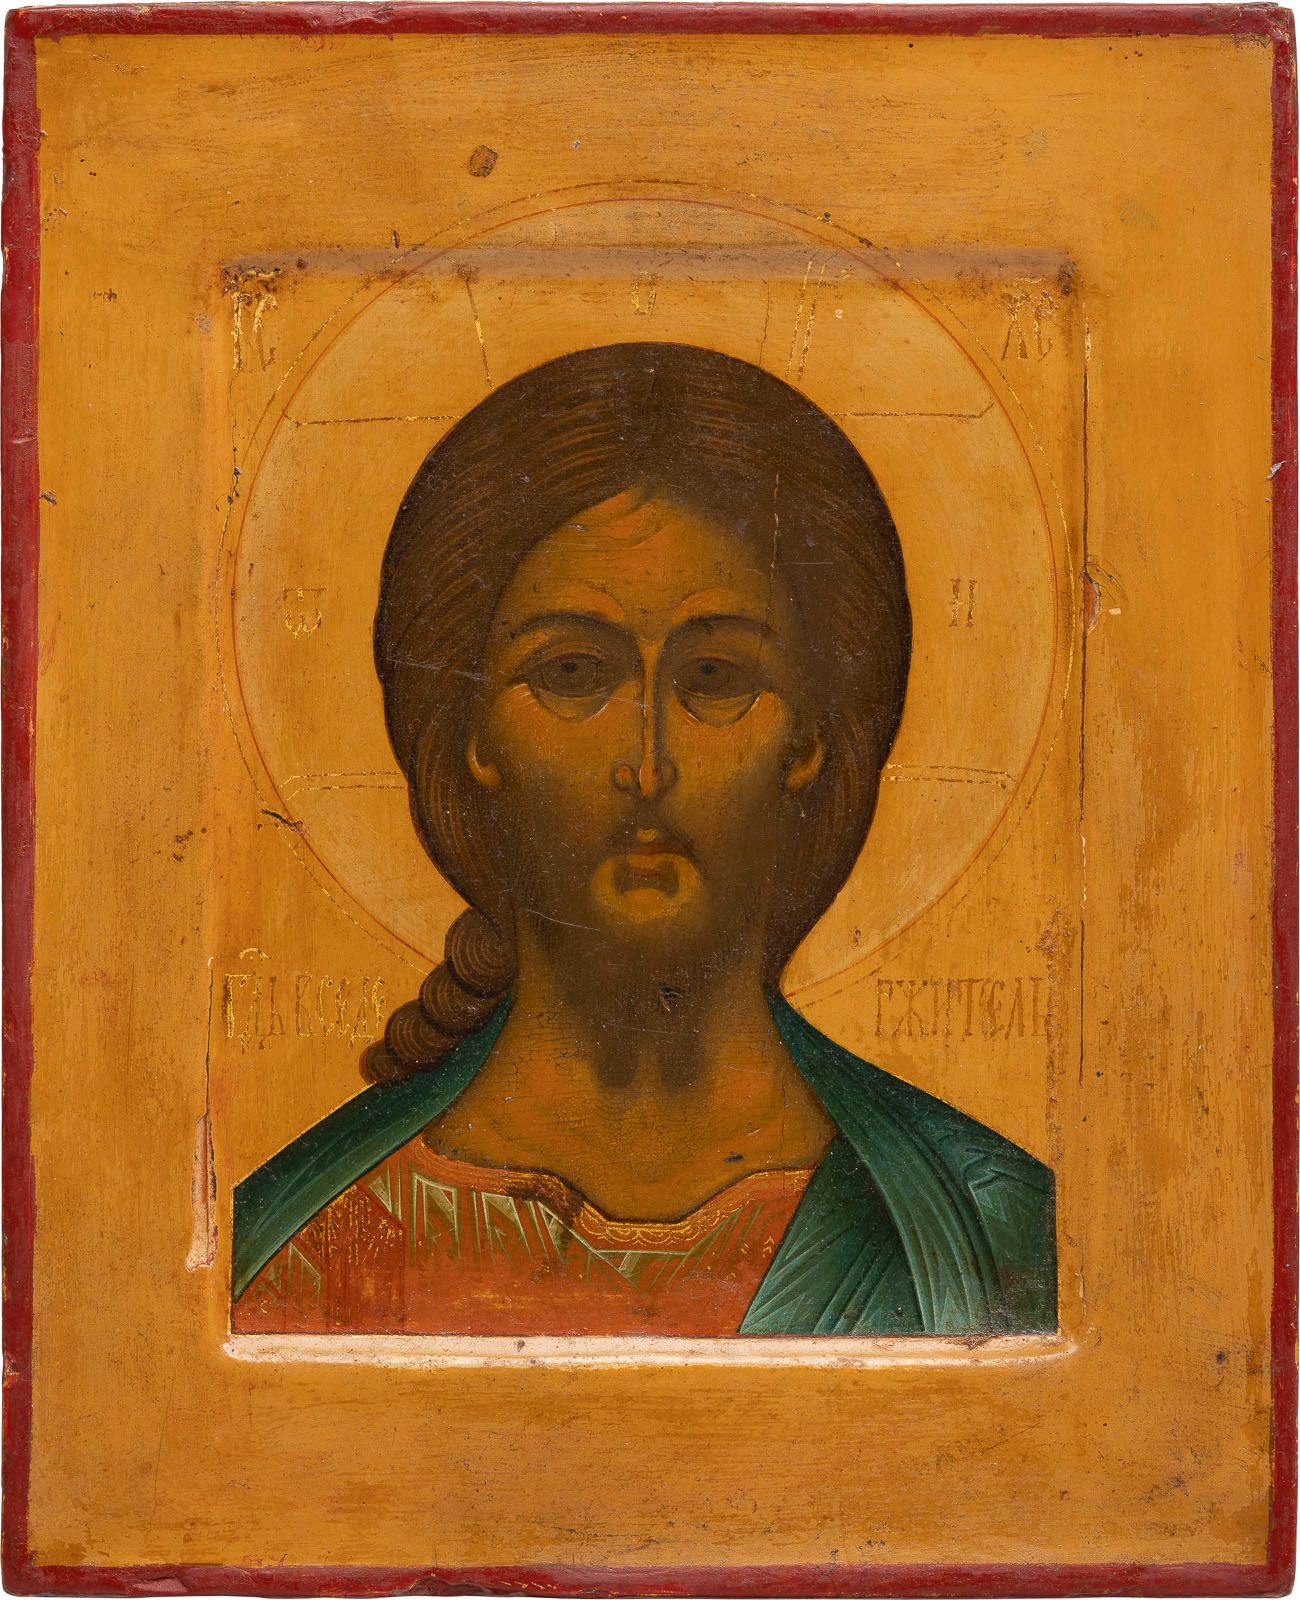 A SMALL ICON SHOWING CHRIST 'WITH THE FEARSOME EYE' PICCOLA ICONA CHE MOSTRA CRI&hellip;